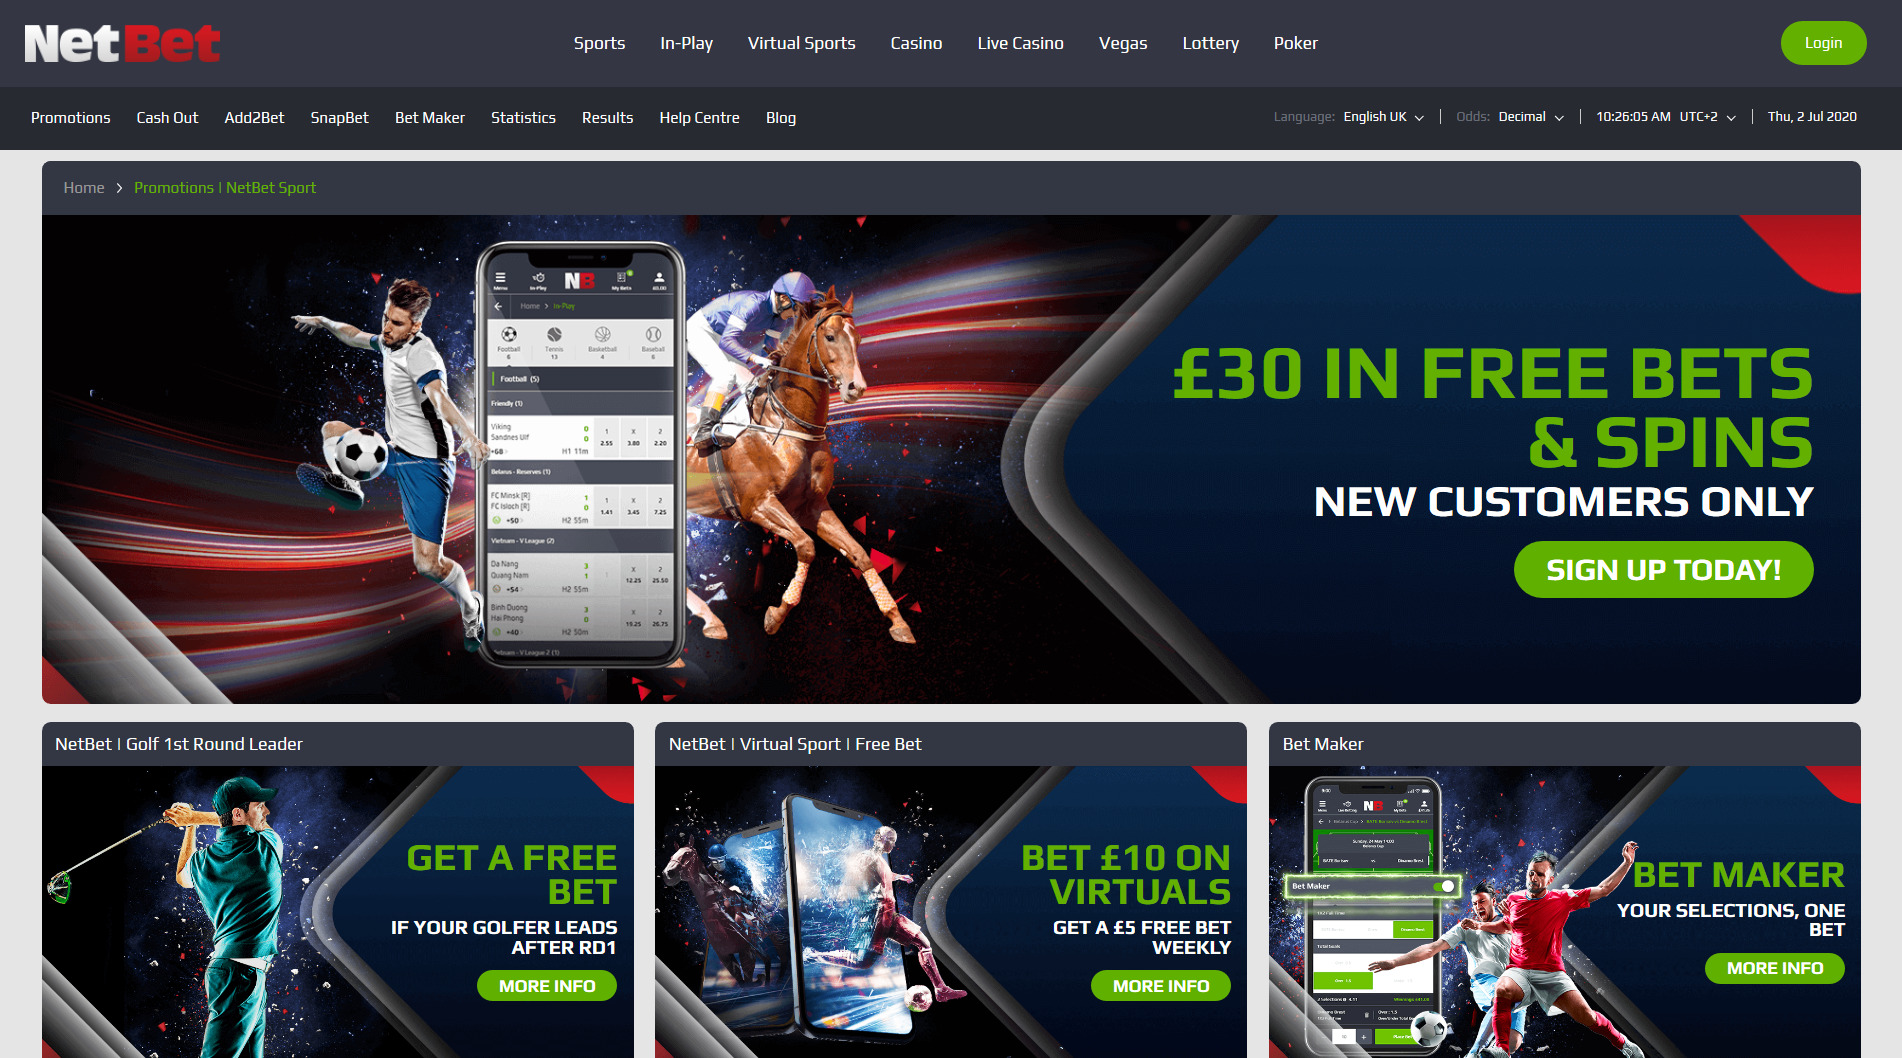 bookmaker netbet bonuses and promotions